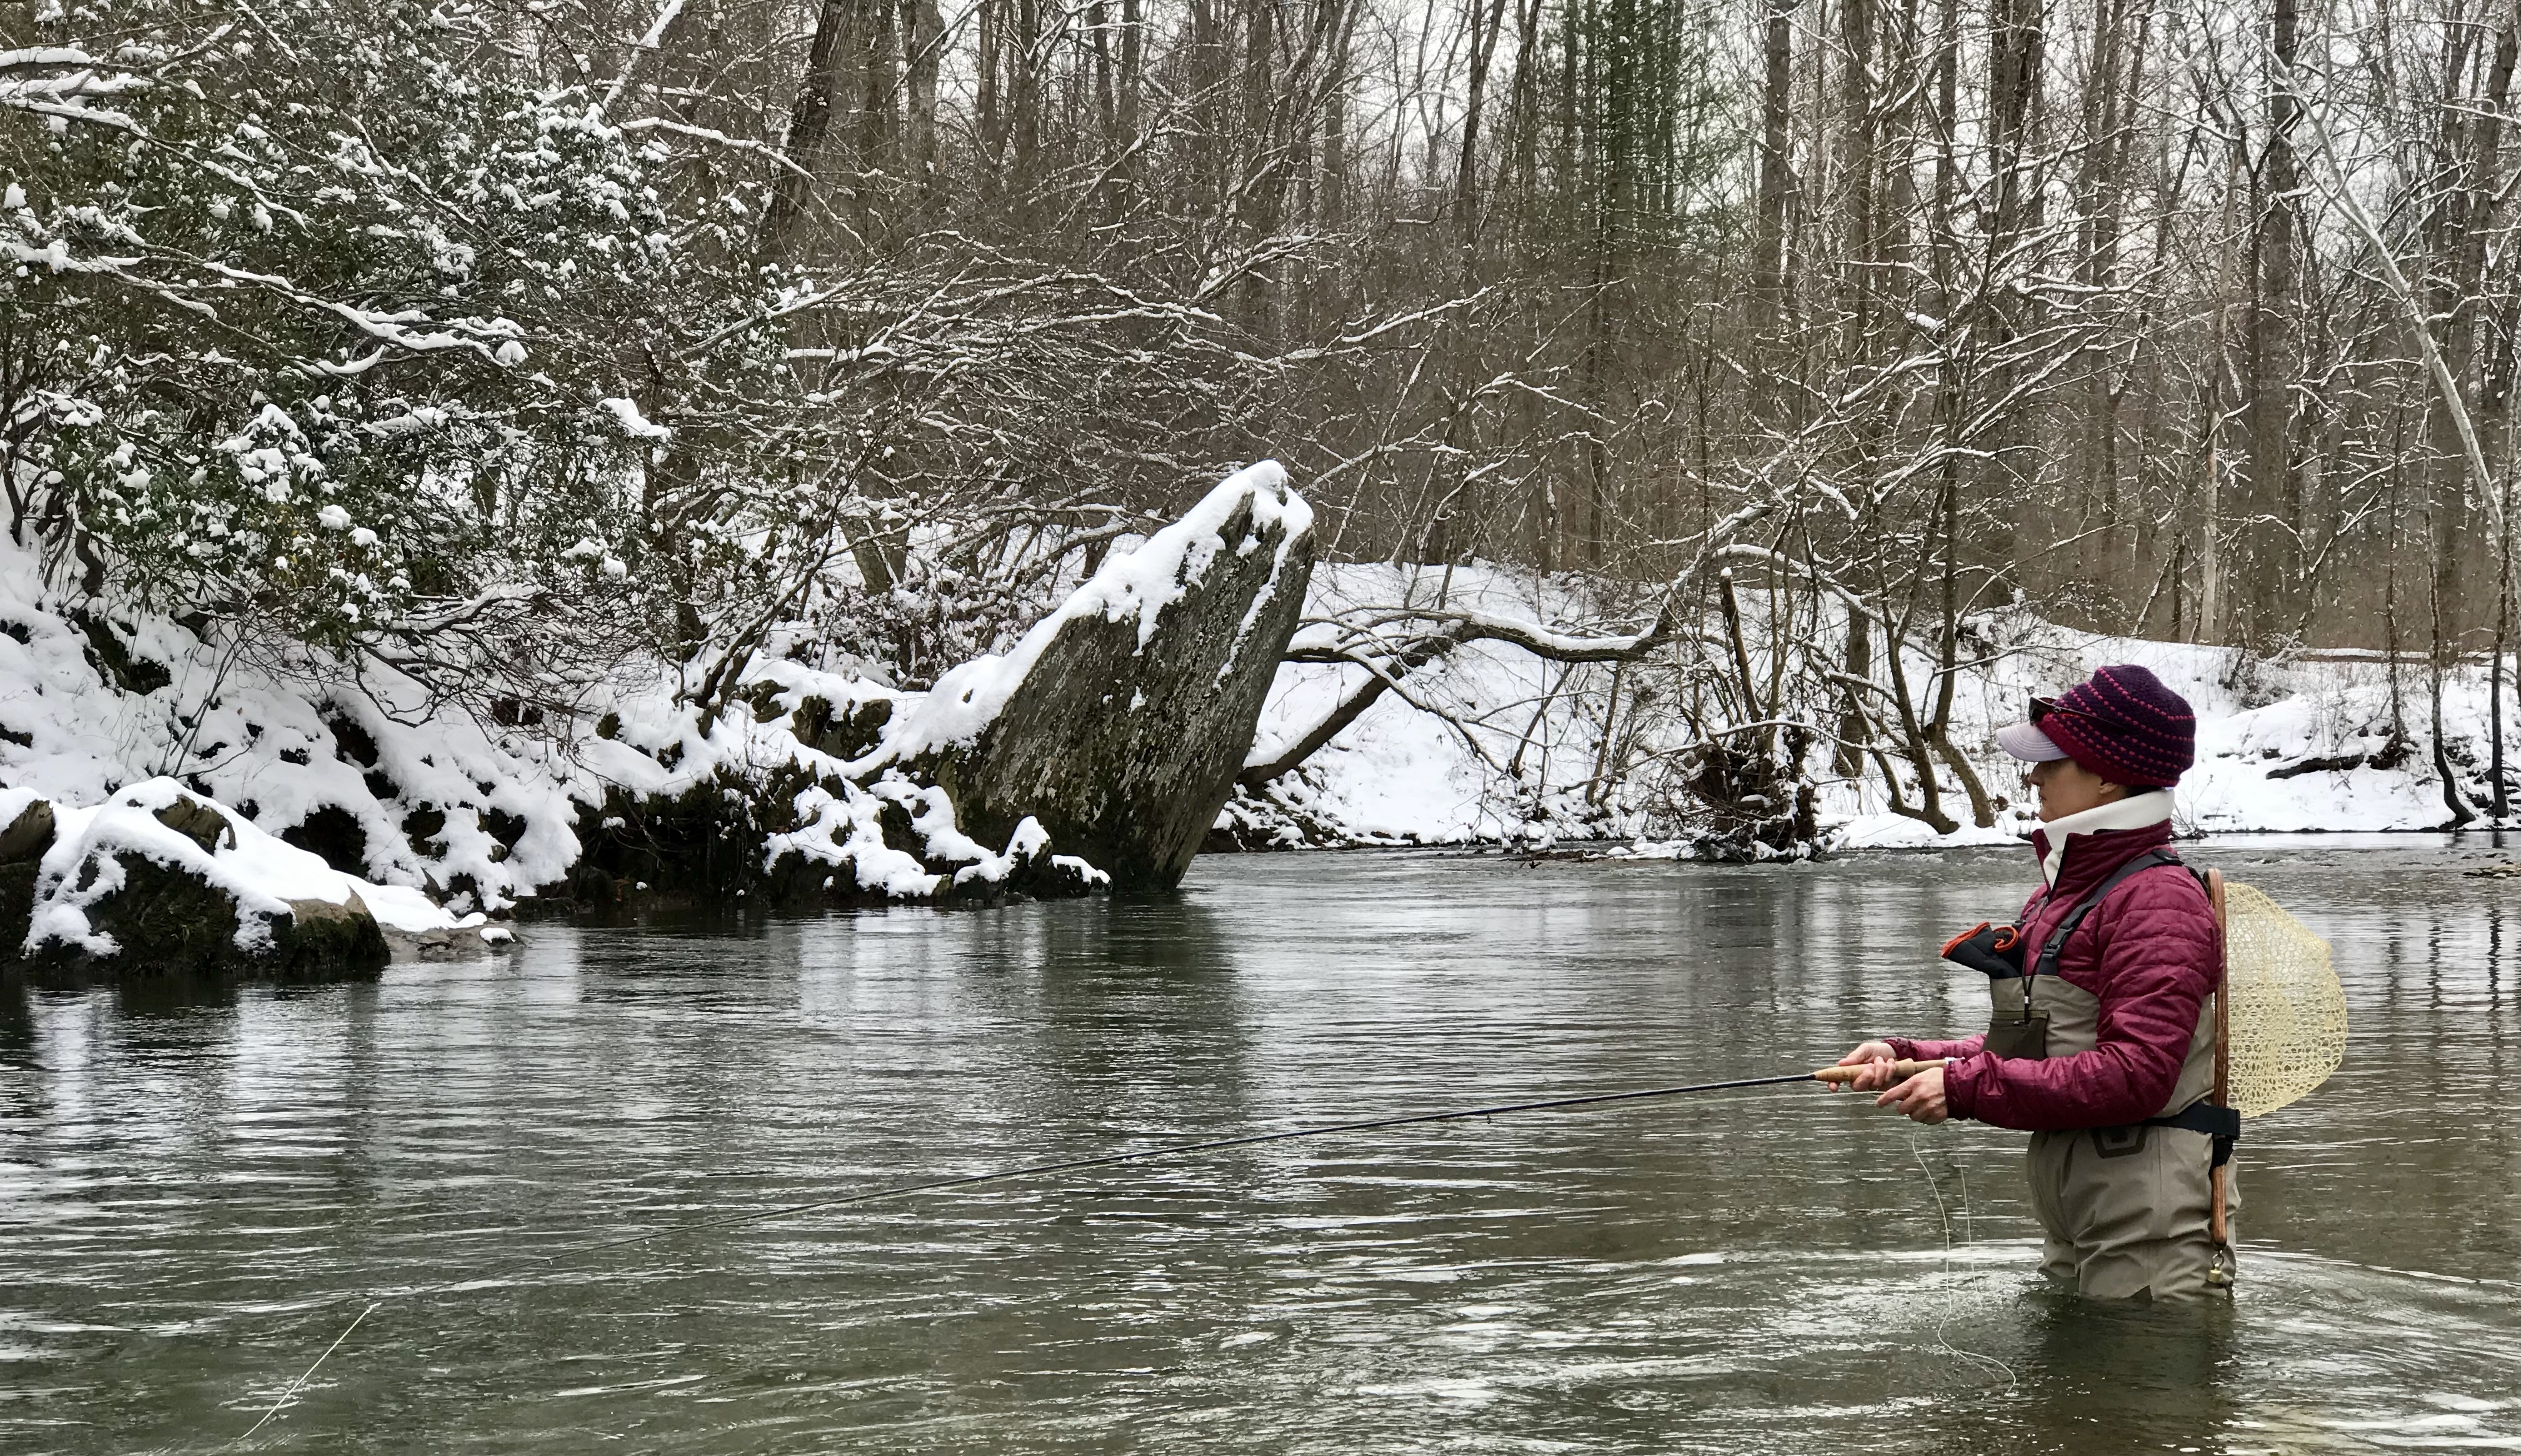 Virginia winter time fishing, trout and musky. - Albemarle Angler